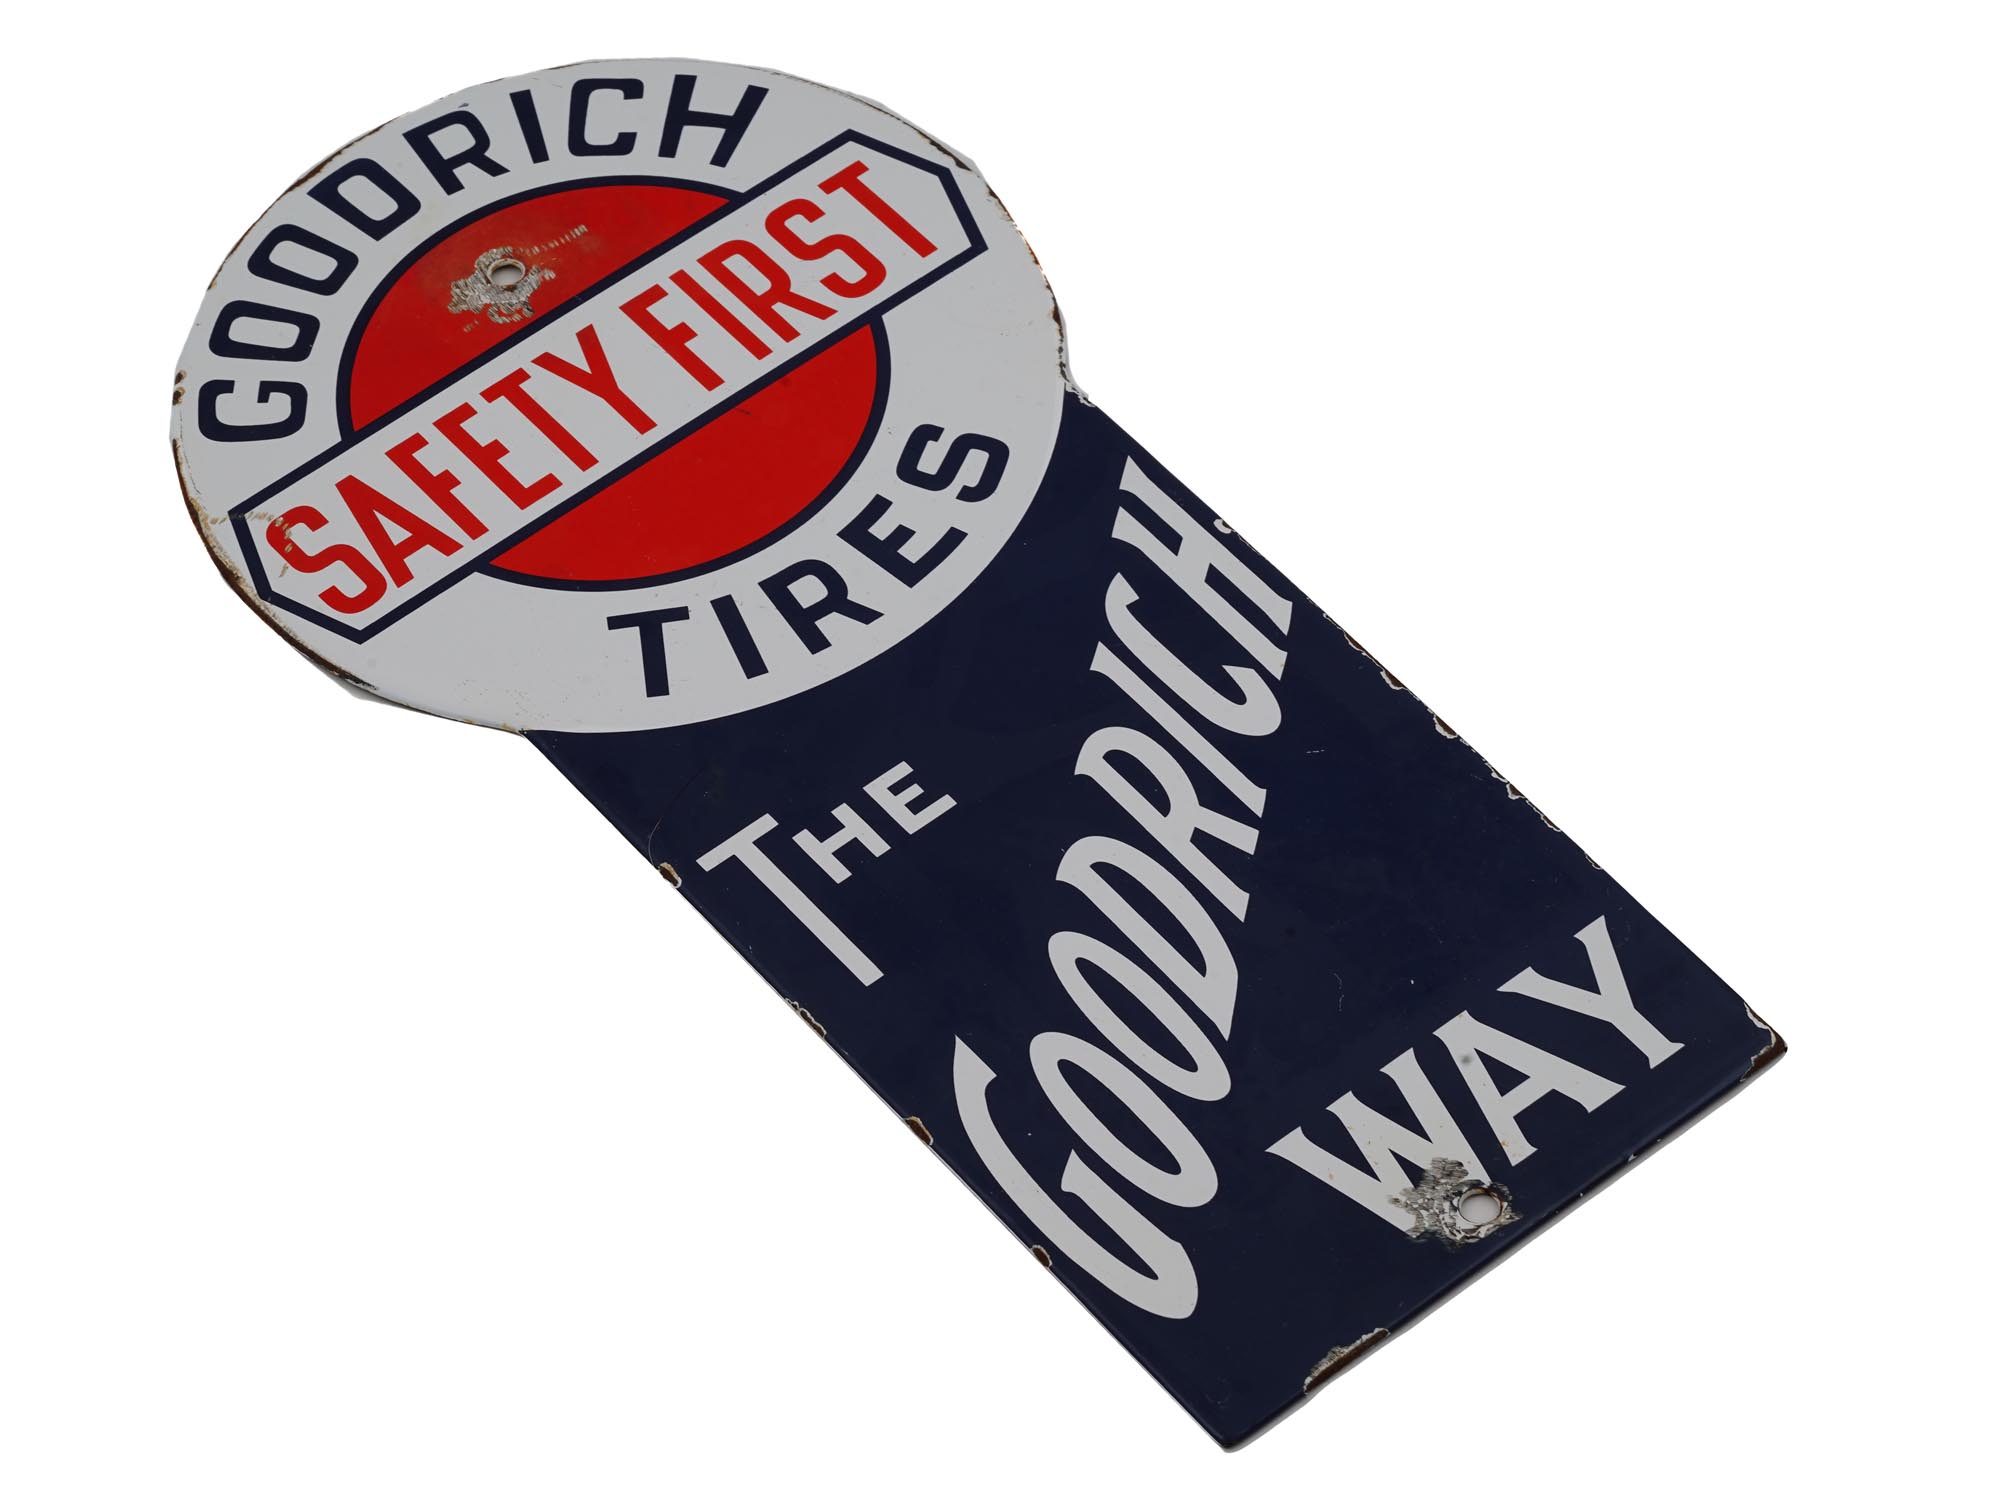 VINTAGE GOODRICH TIRES SAFETY FIRST METAL SIGN PIC-1